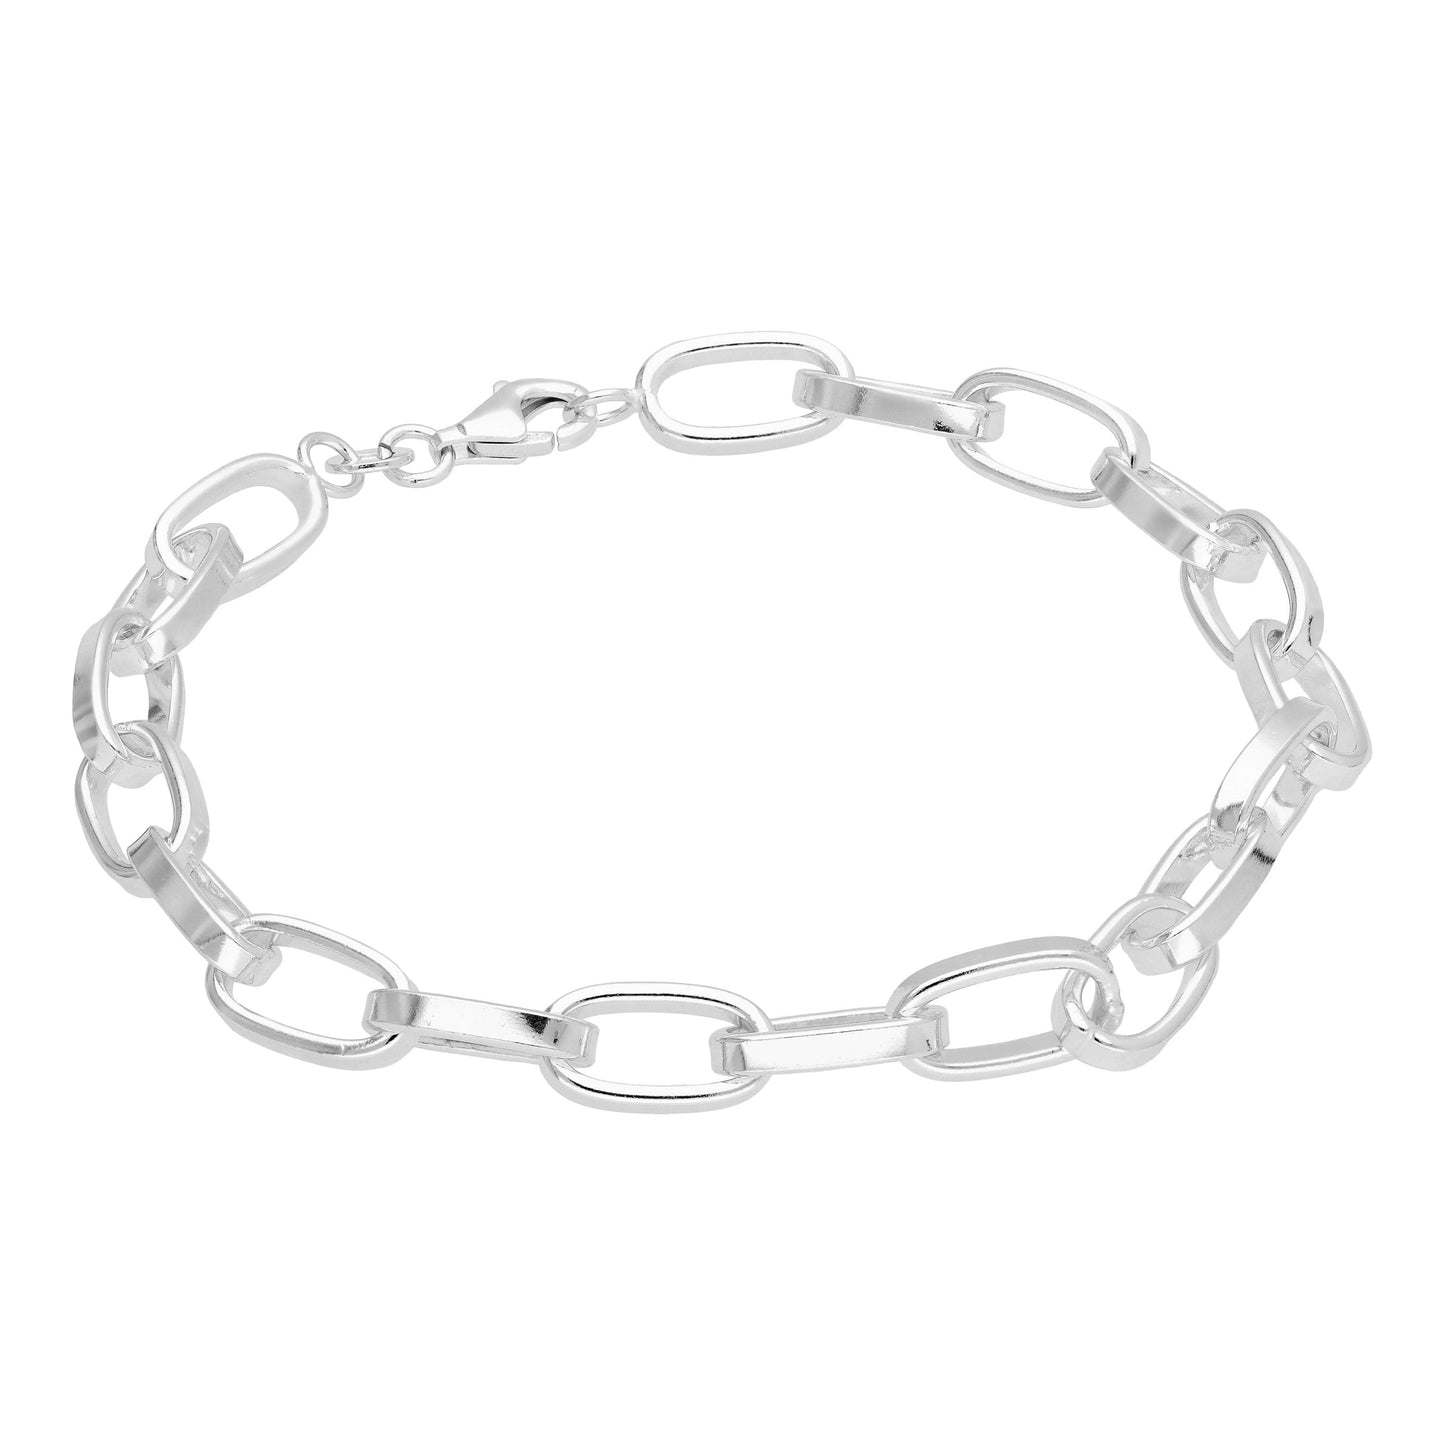 Heavy Sterling Silver Link Chain Bracelet 7 Inches